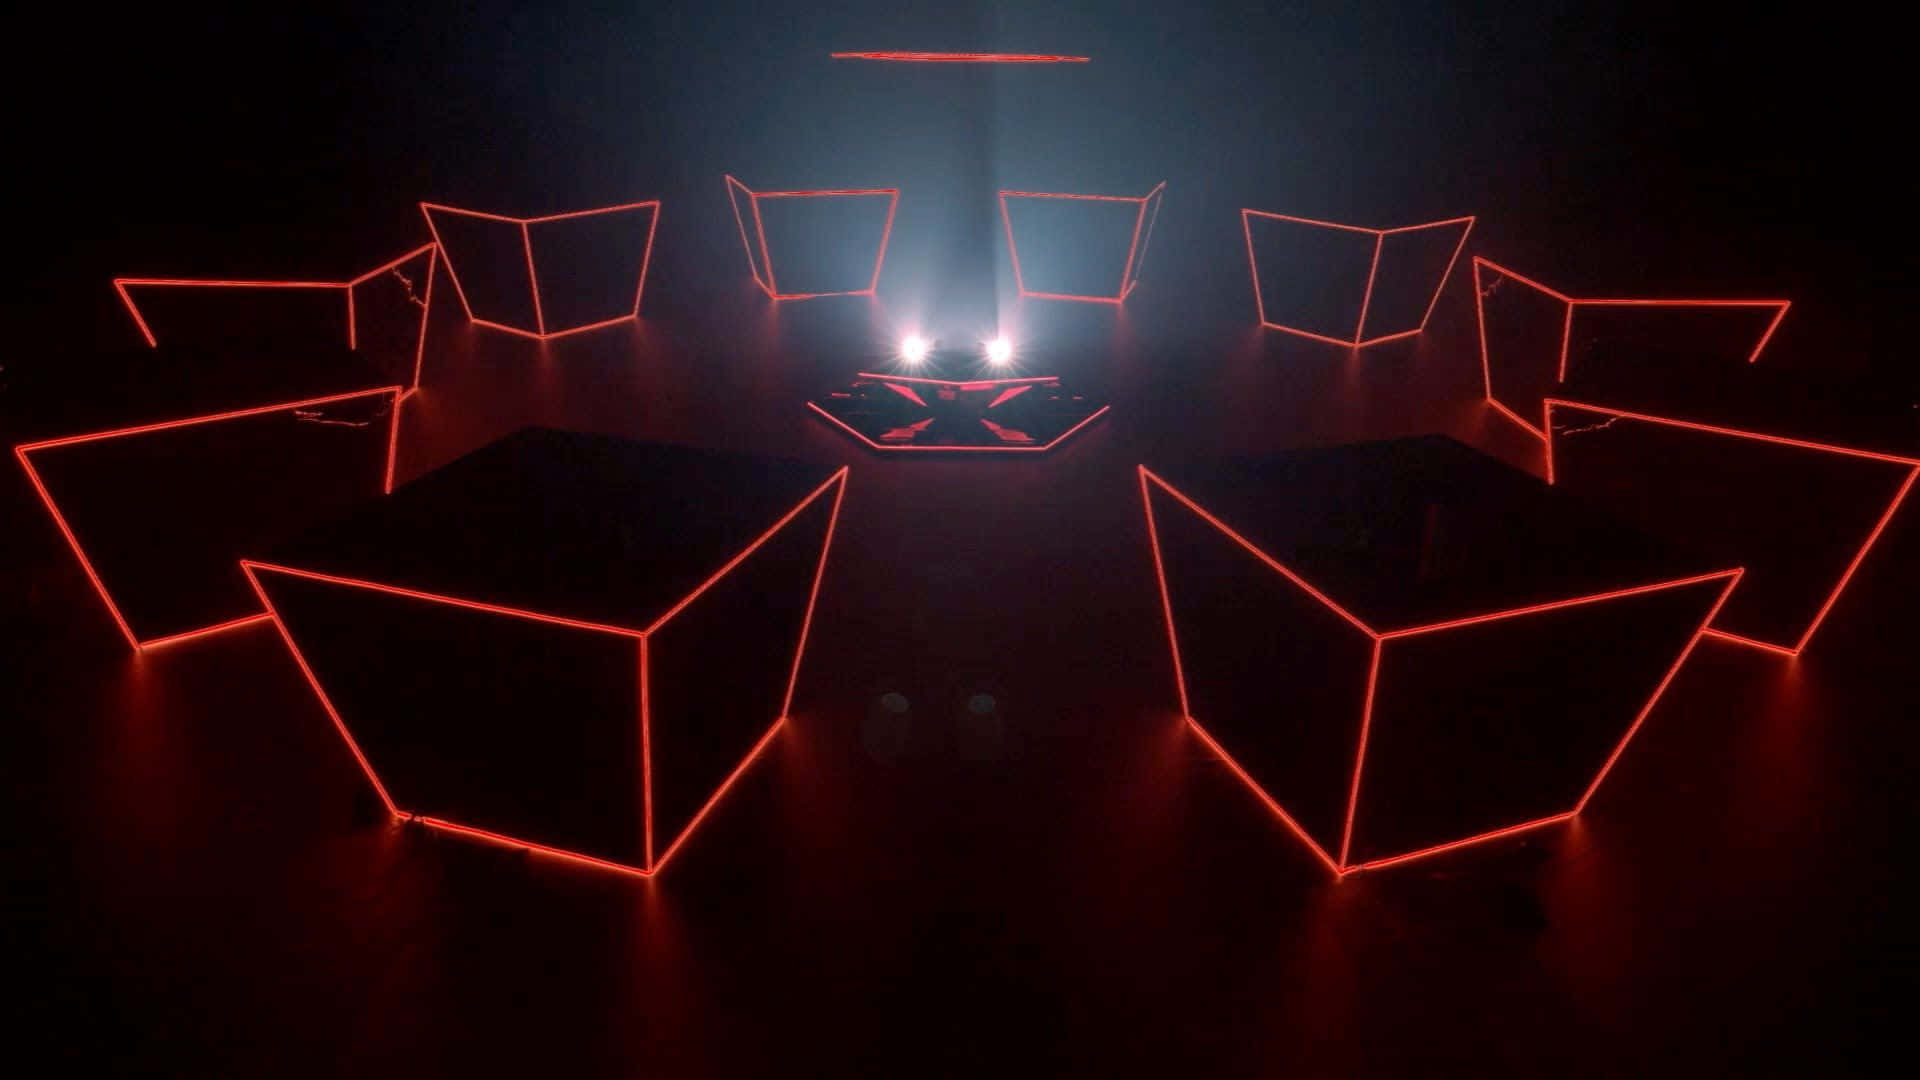 A Group Of Red Cubes In A Dark Room Wallpaper